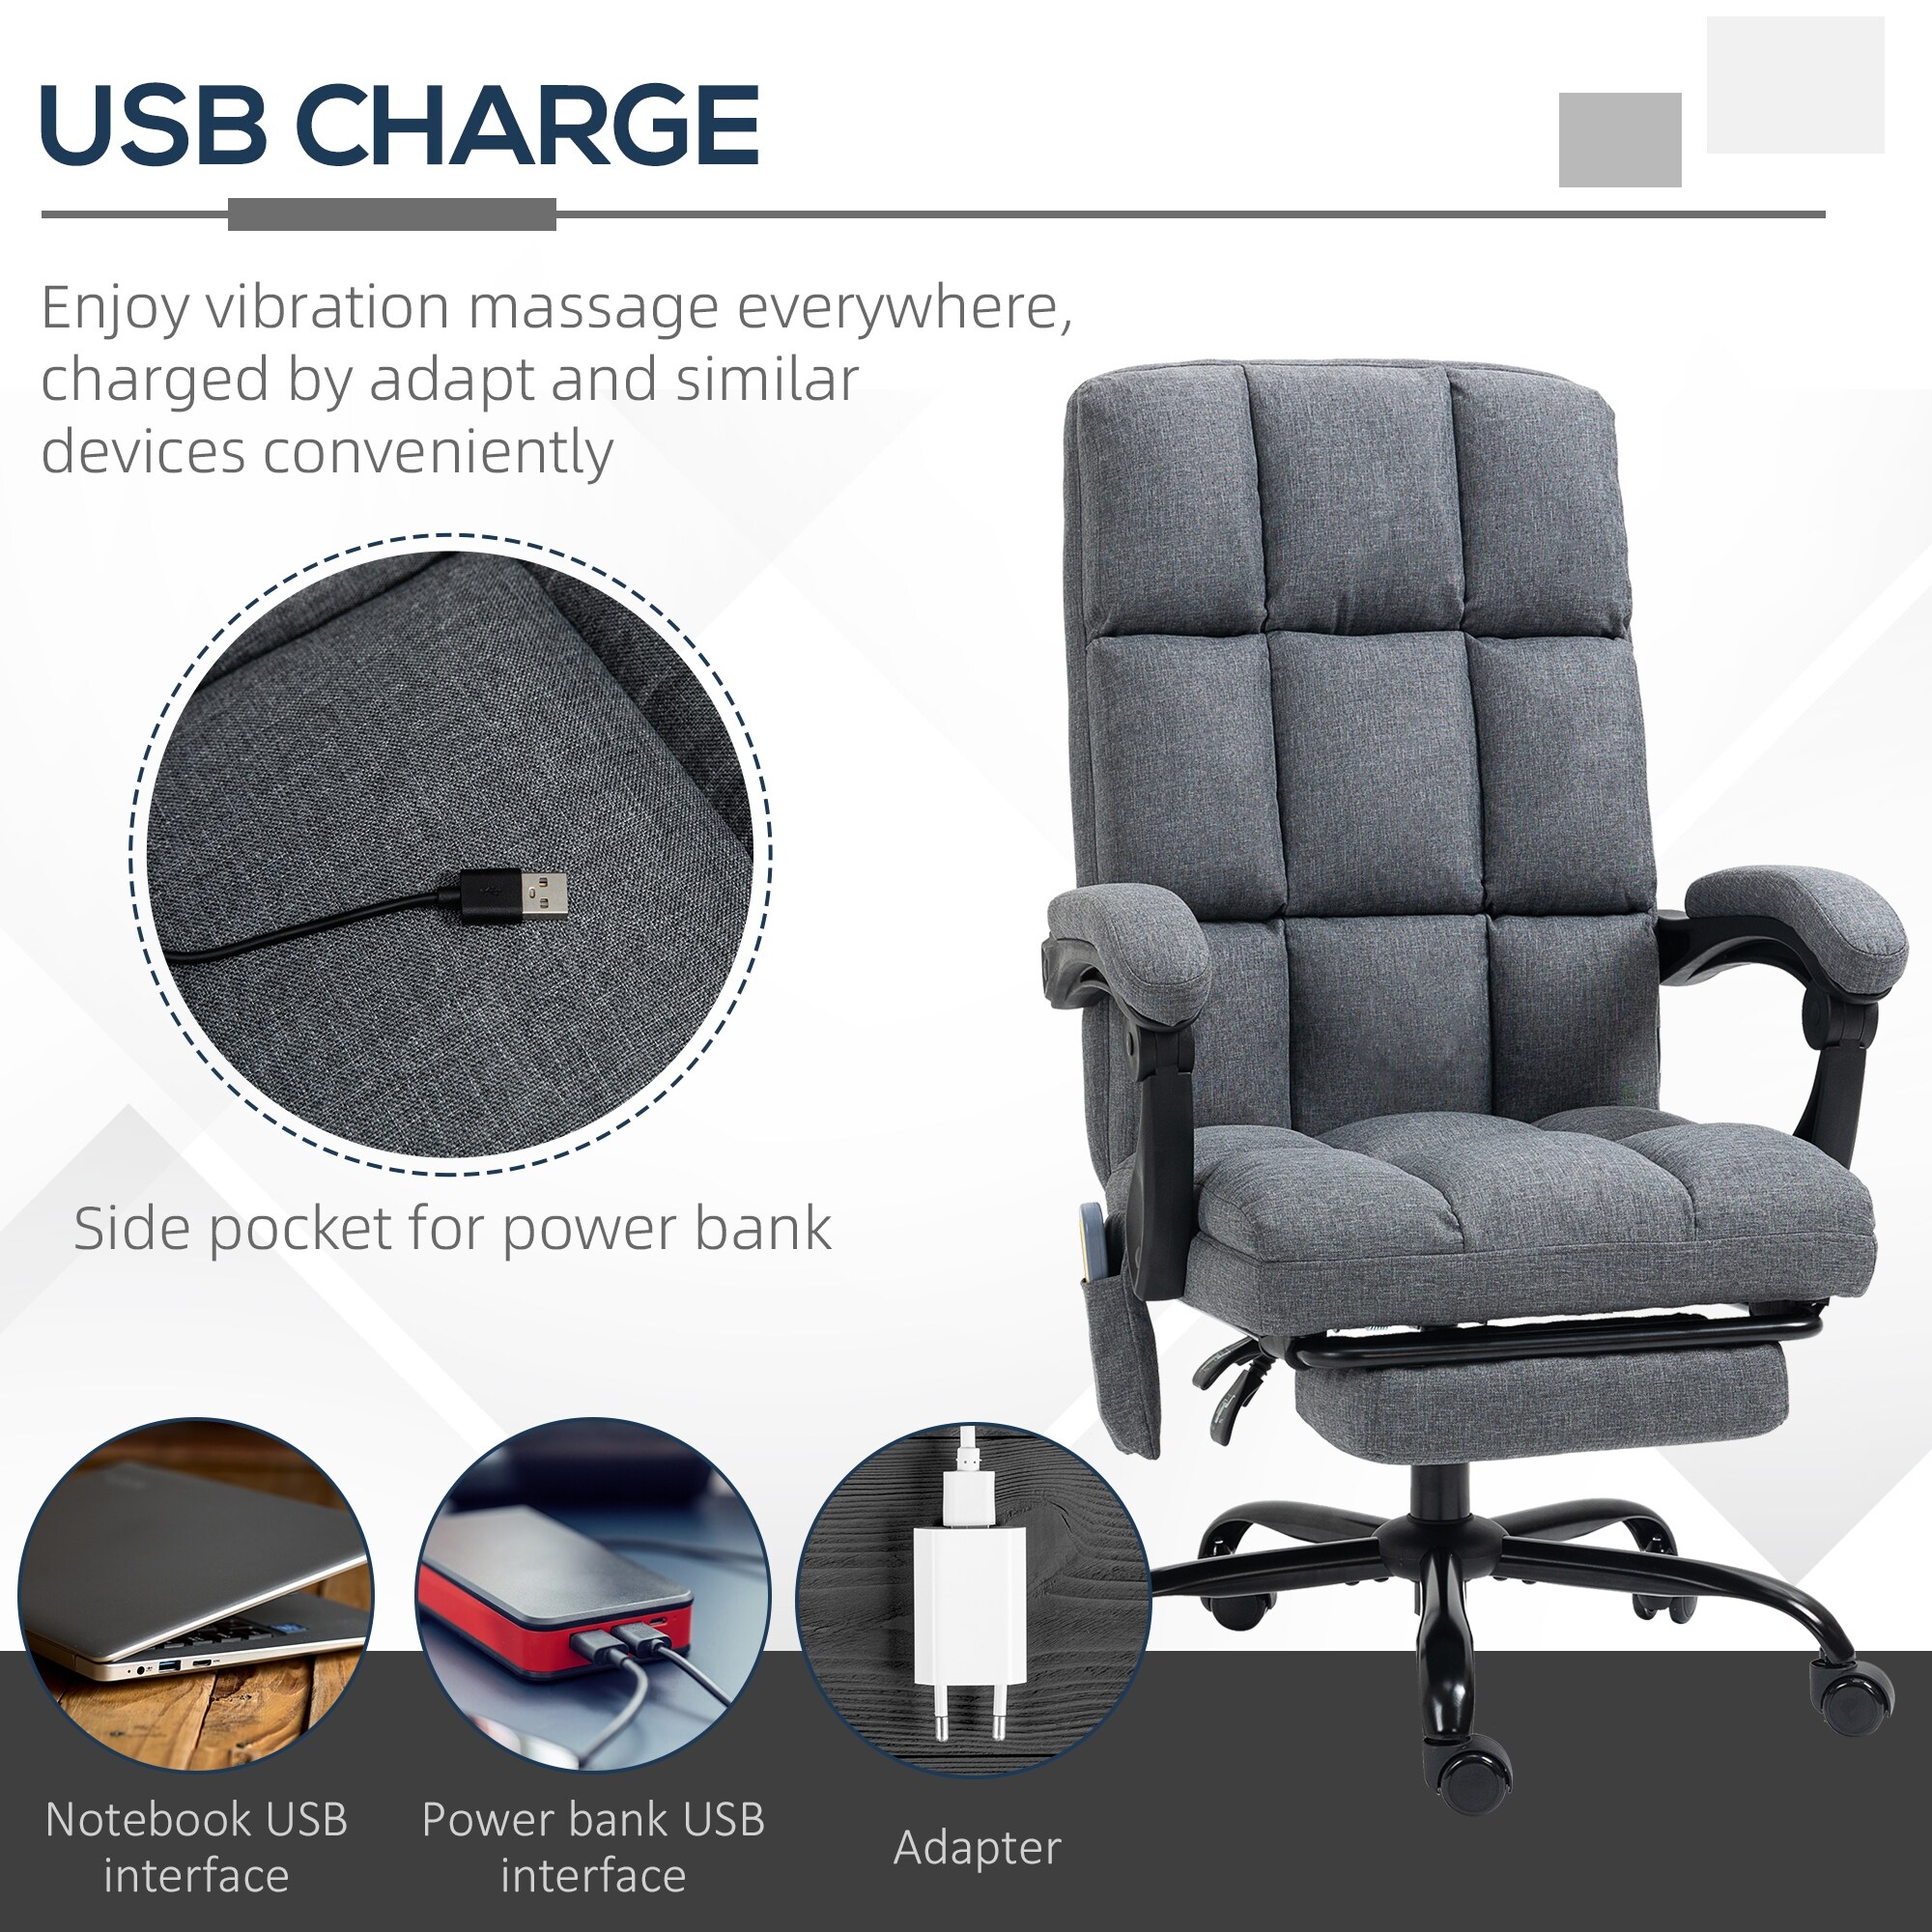 Vinsetto High Back Gaming Chair Recliner Height Adjustable with Pillow,  Massage Lumbar, and Footrest - 27.25*24.75*52 - Bed Bath & Beyond - 32658374